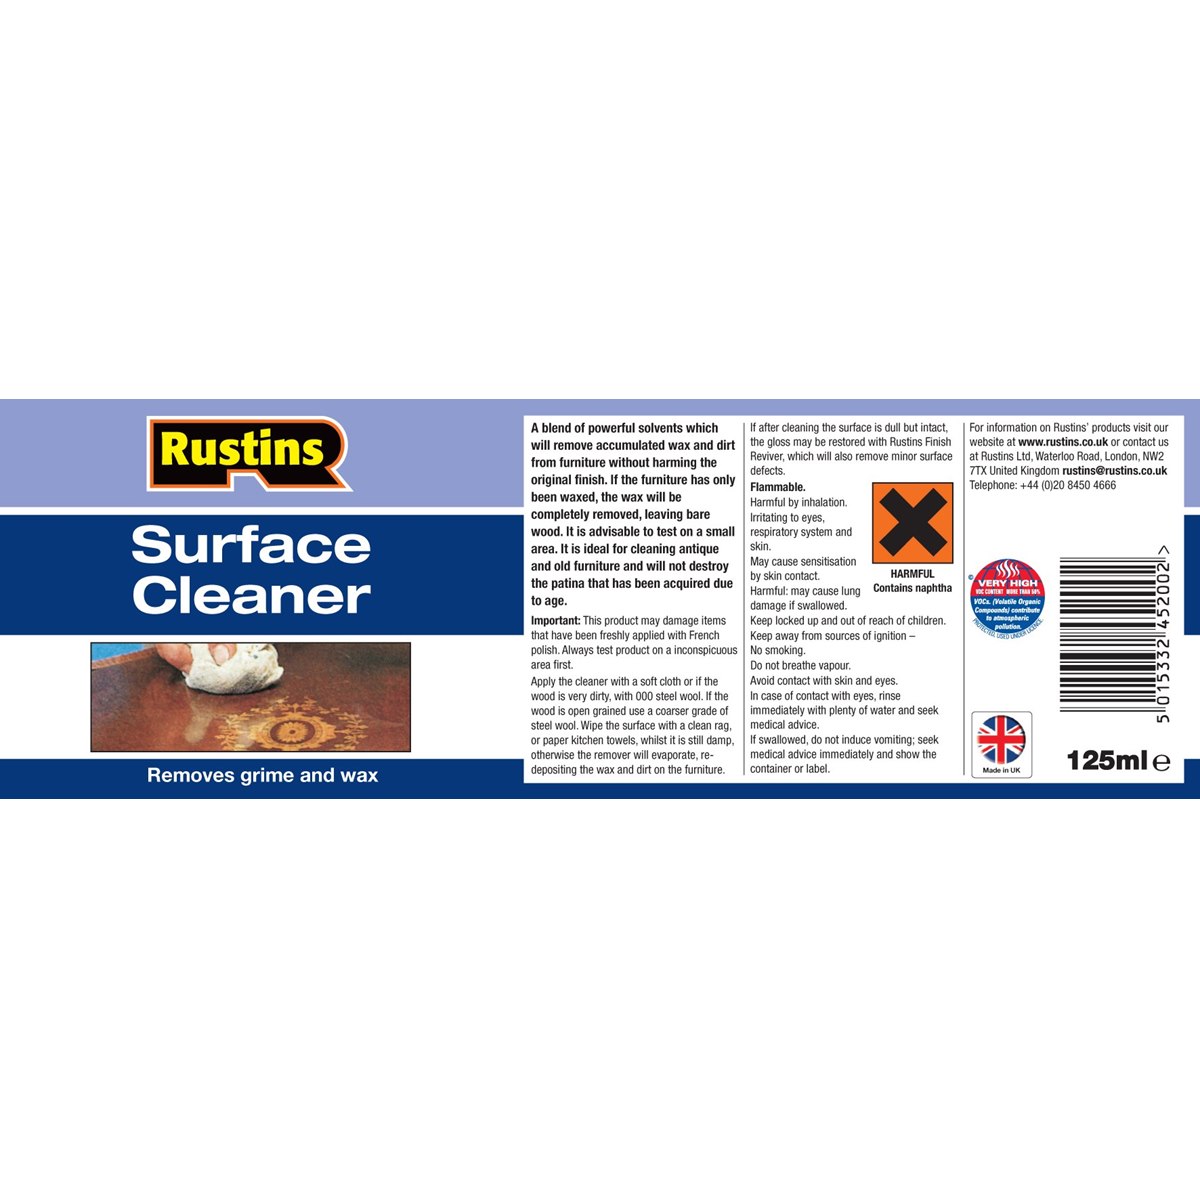 Surface Cleaner for removing furniture wax